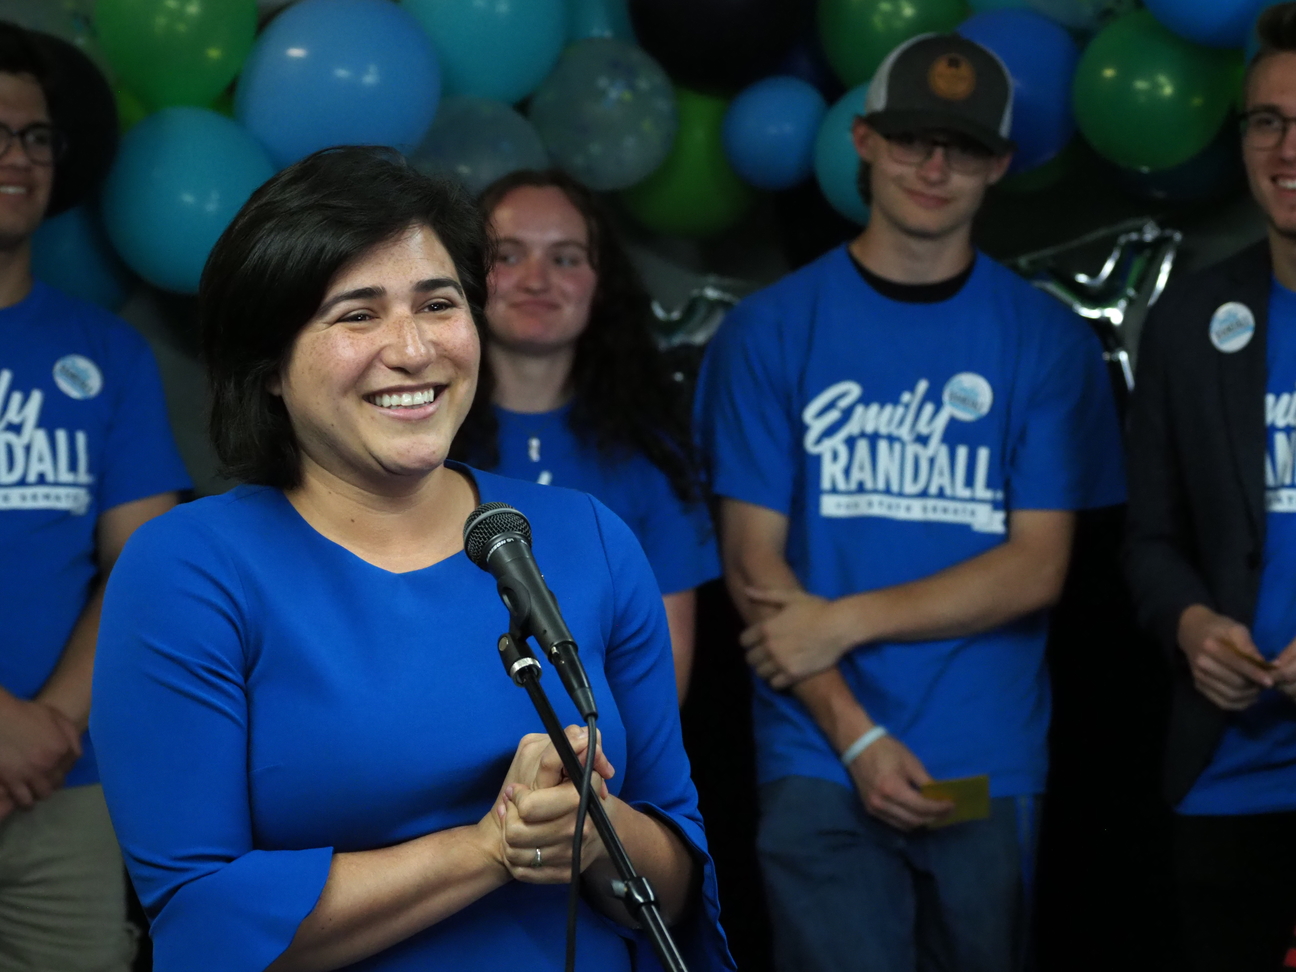 Emily Randall speaks at her campaign kickoff, flanked by her campaign team